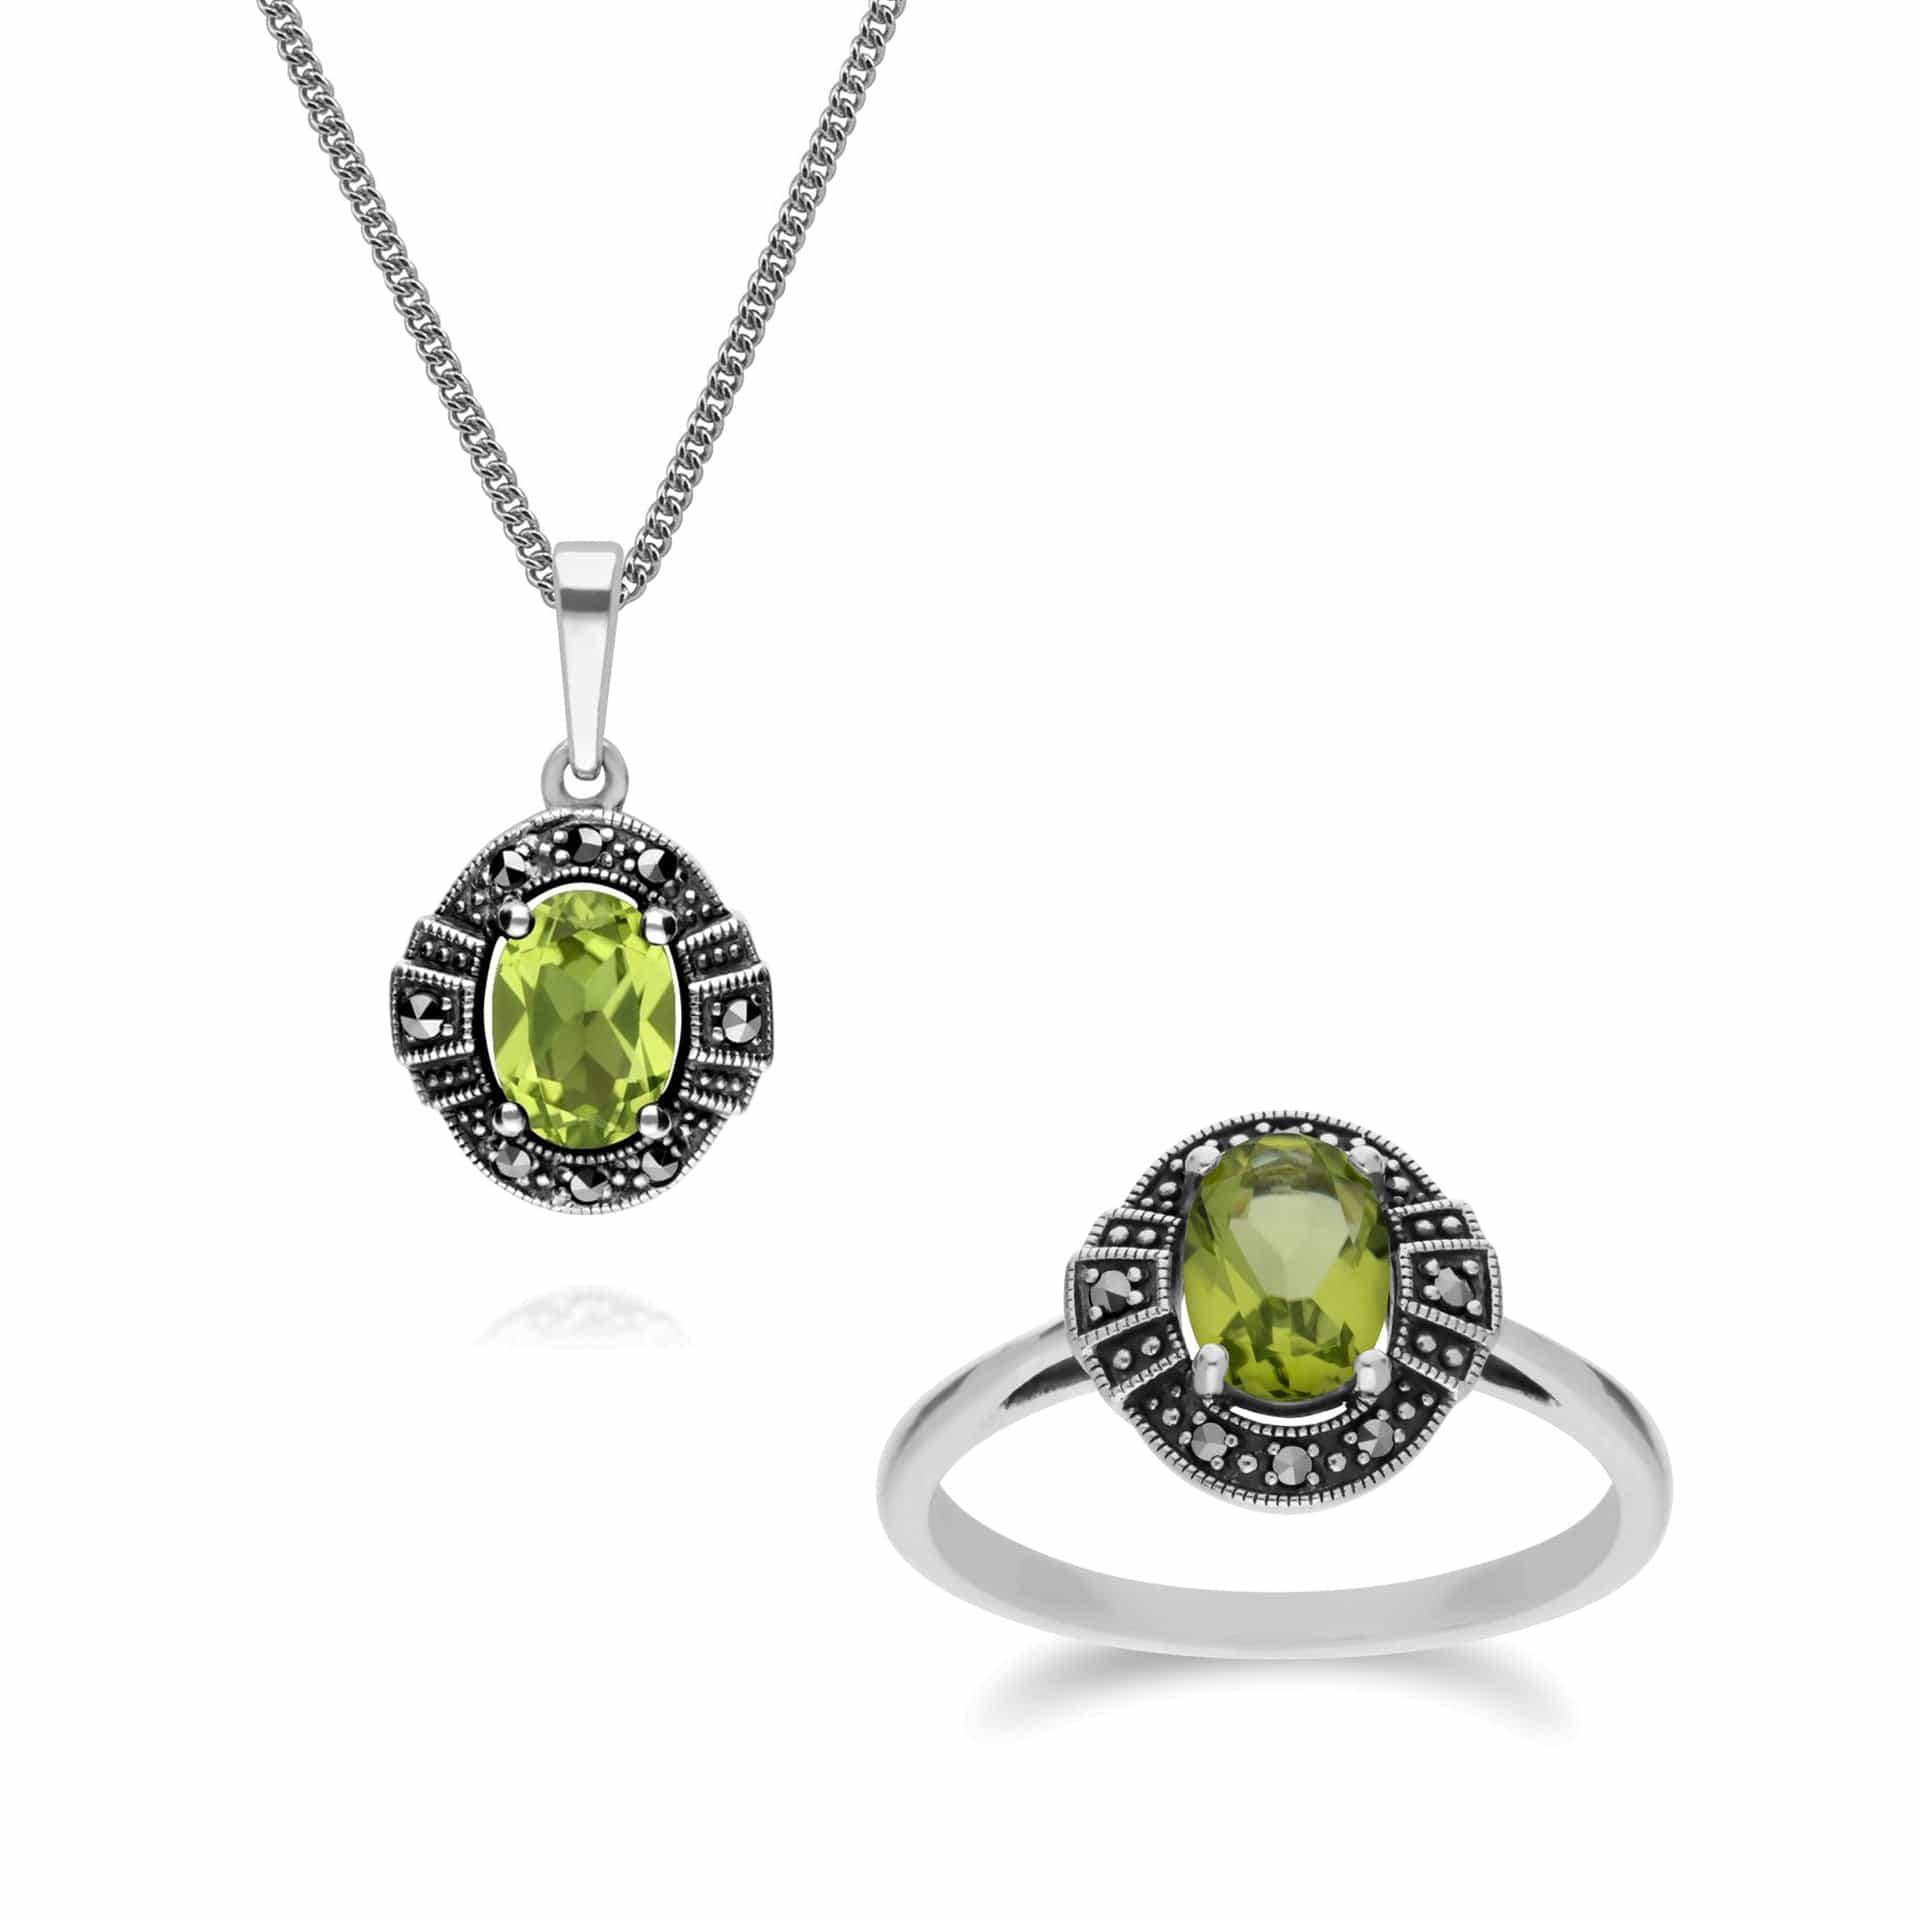 214P303304925-214R605704925 Art Deco Style Oval Peridot and Marcasite Cluster Ring & Pendant Set in 925 Sterling Silver 1